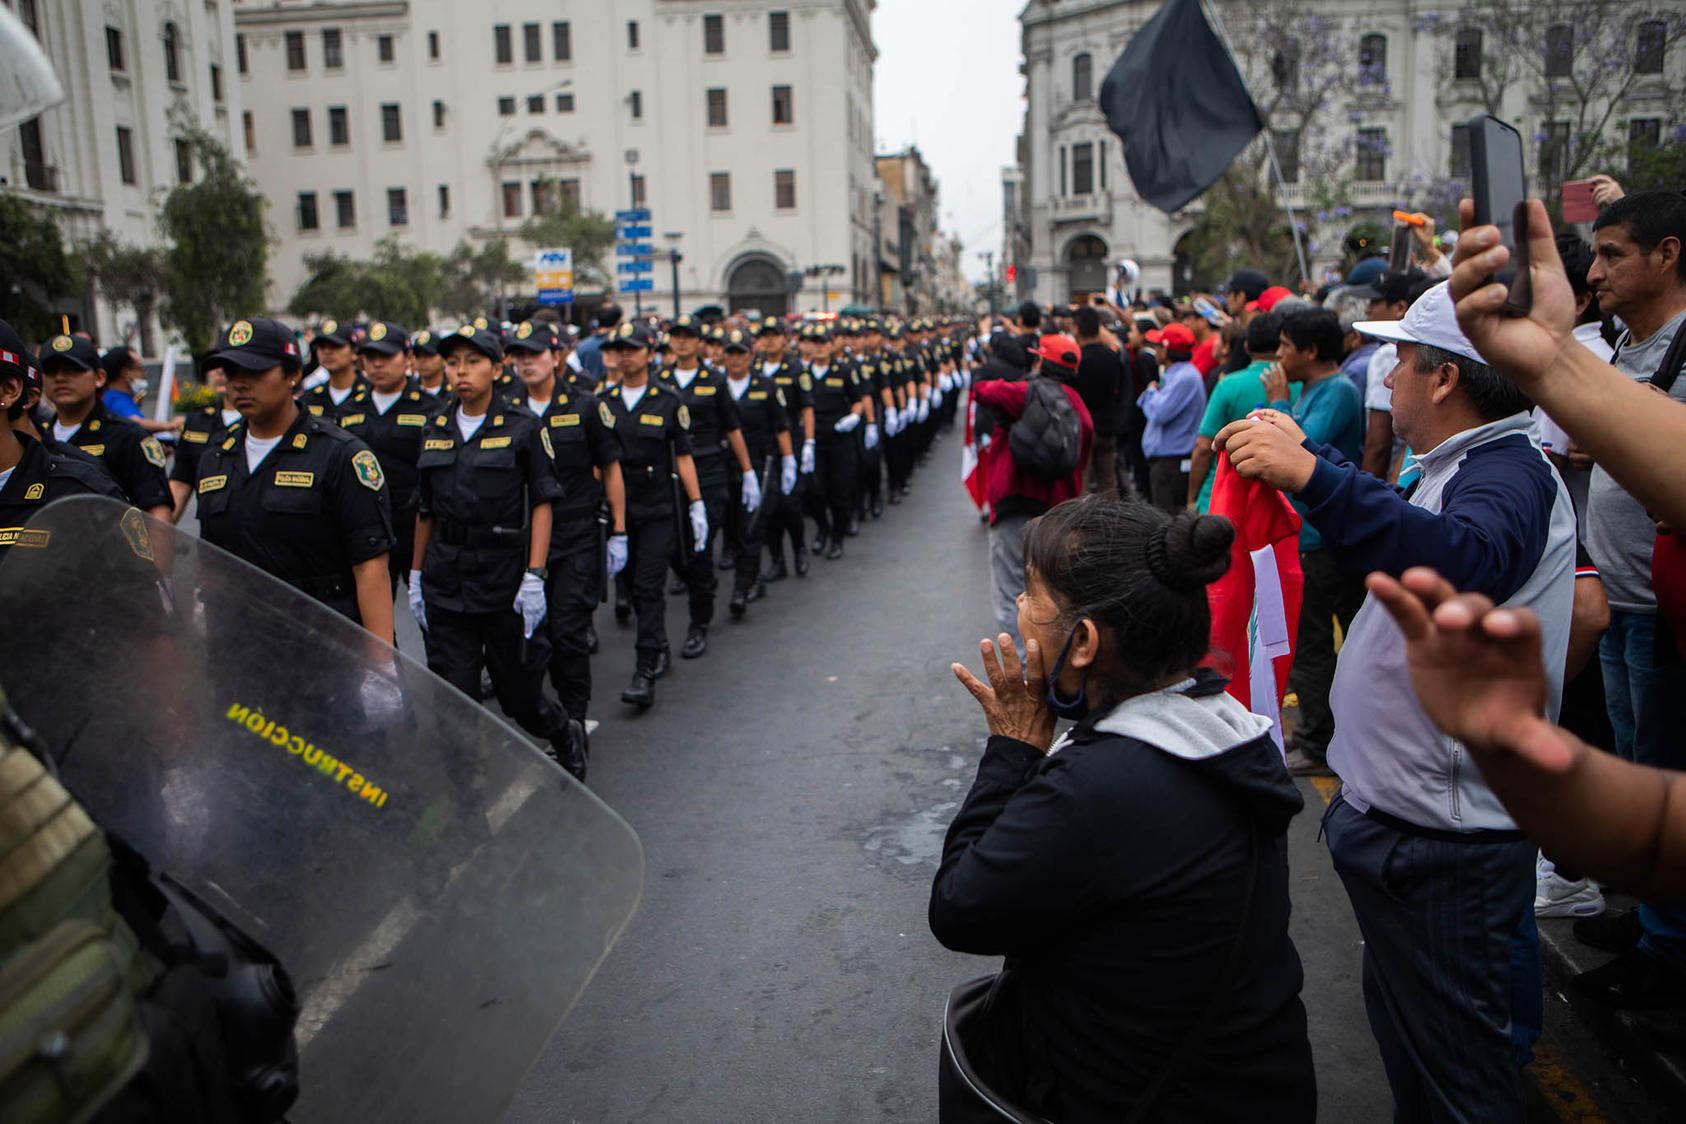 Supporters of Pedro Castillo, the ousted president of Peru, protest in front of police in downtown Lima on Friday, Dec. 16, 2022. (Marco Garro/The New York Times)